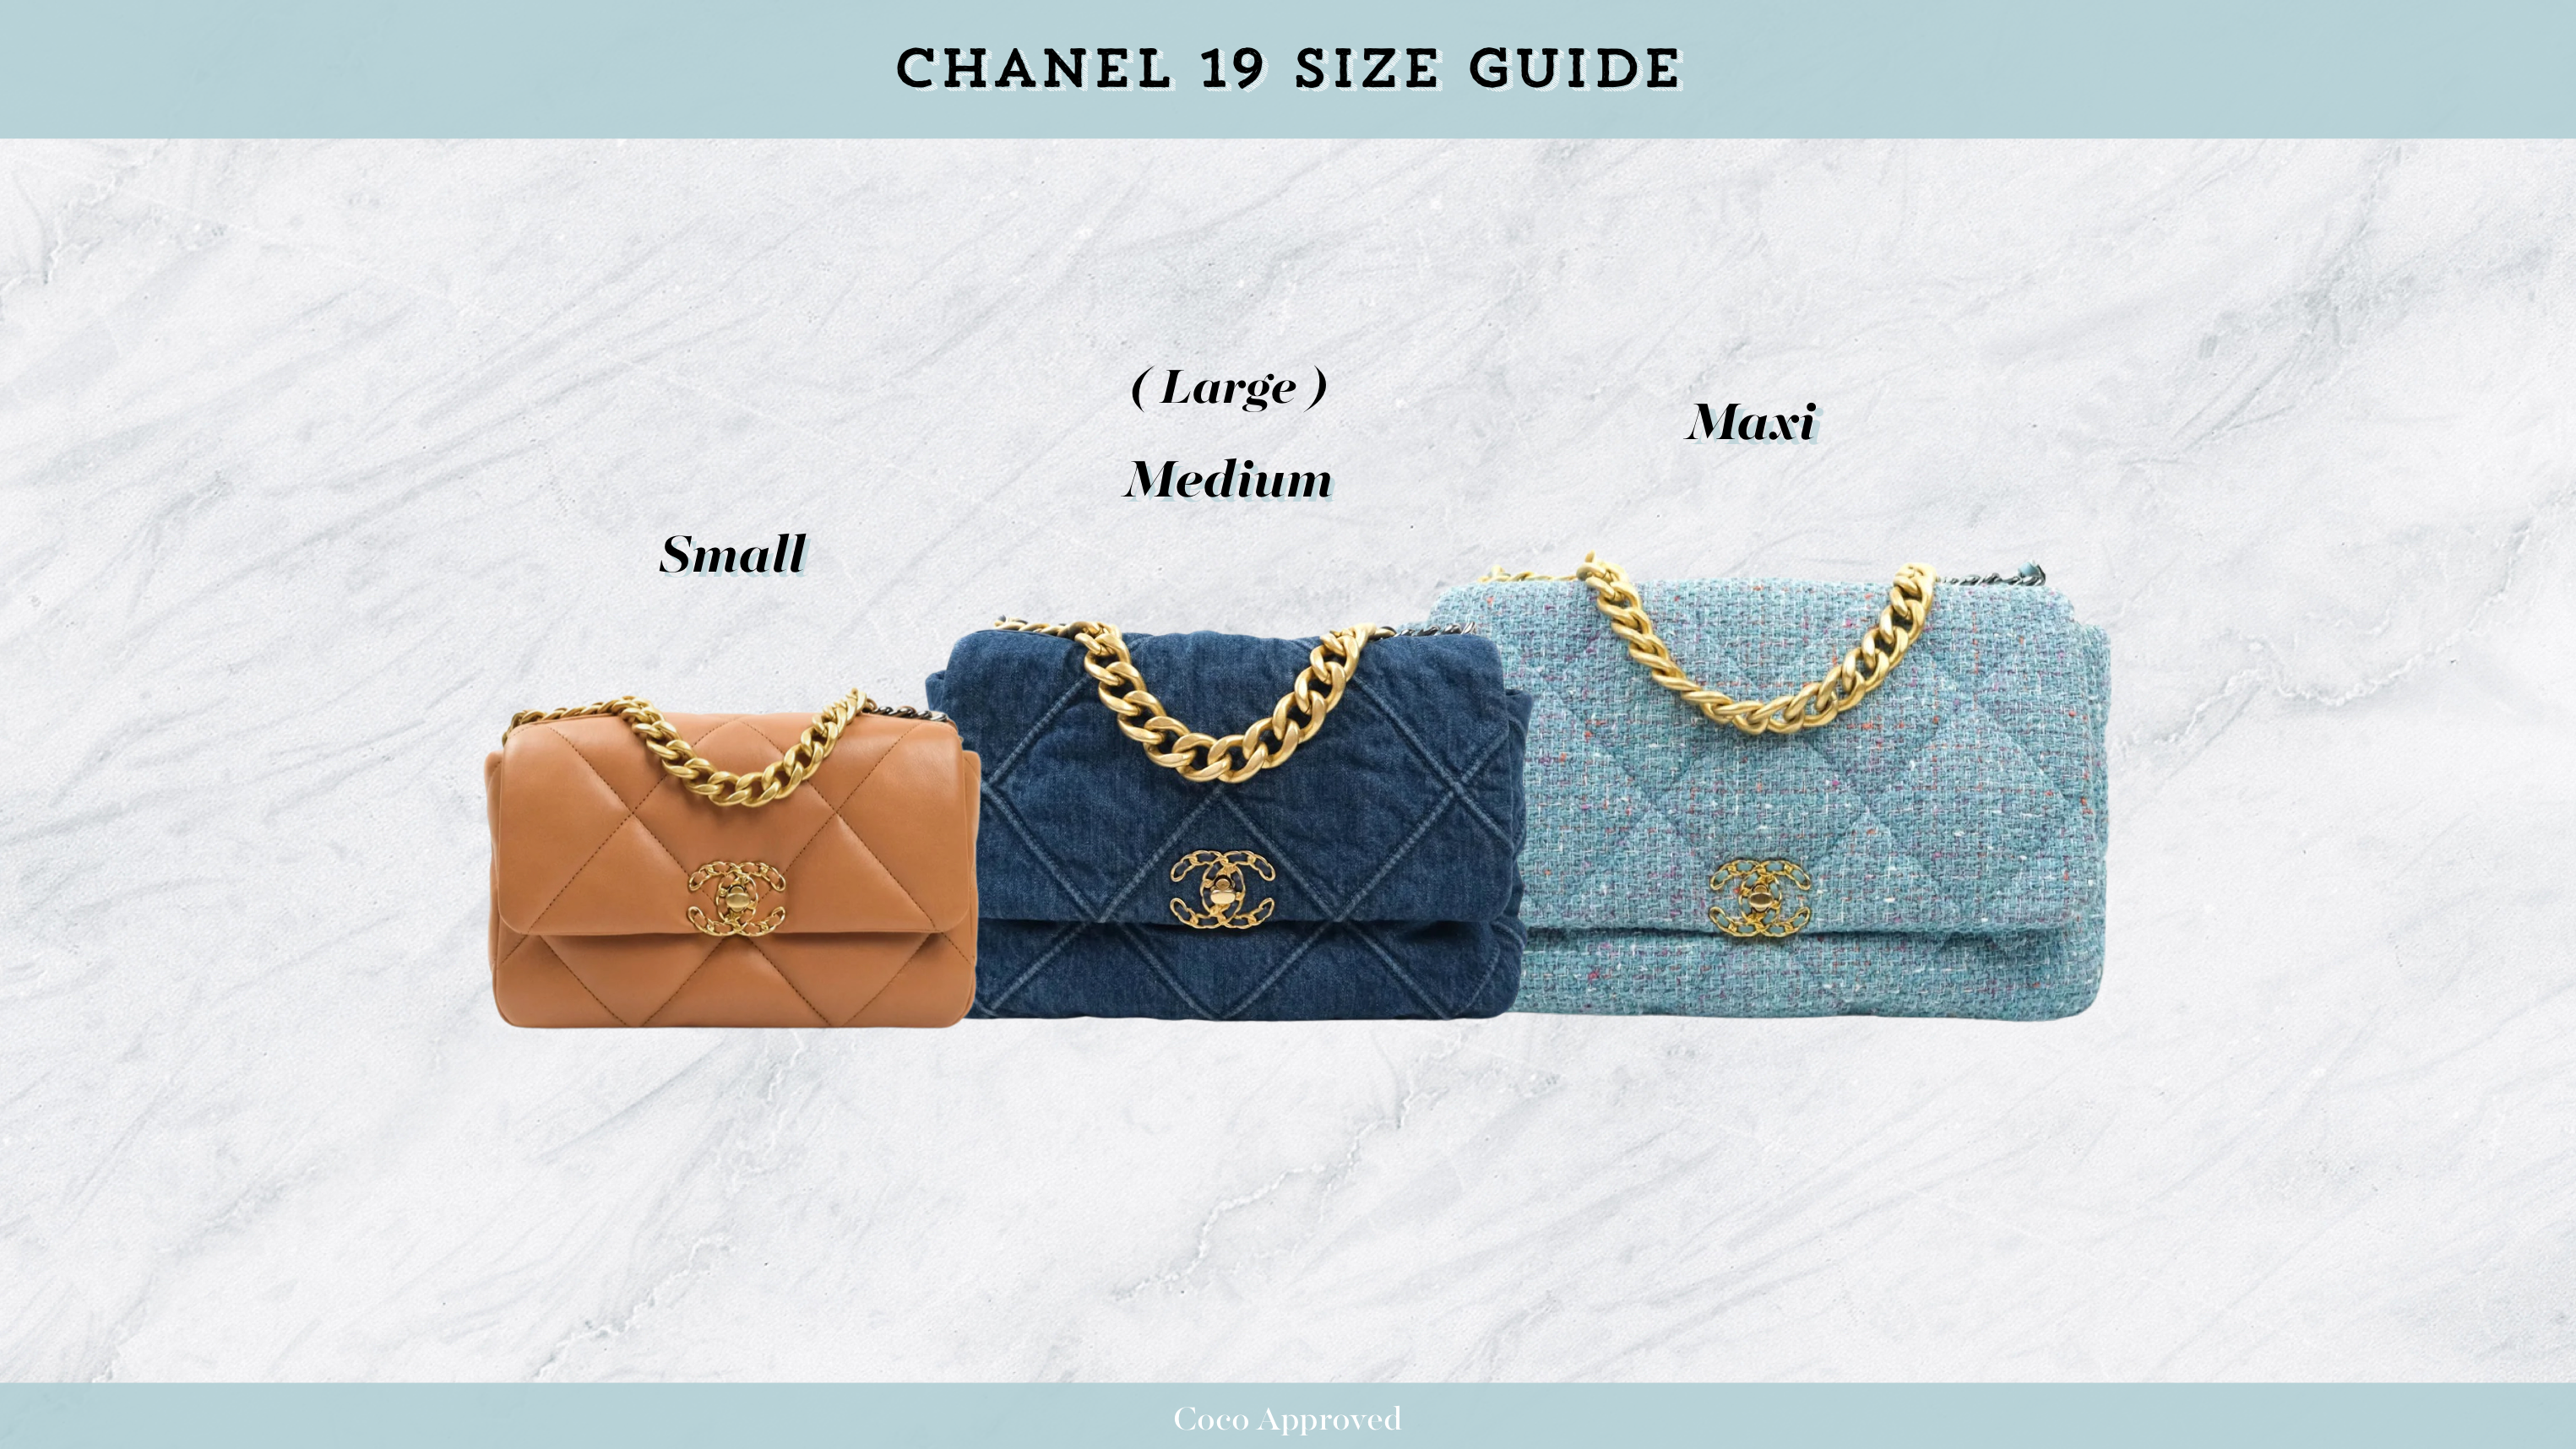 Chanel 19 size guide: small, medium (large), maxi